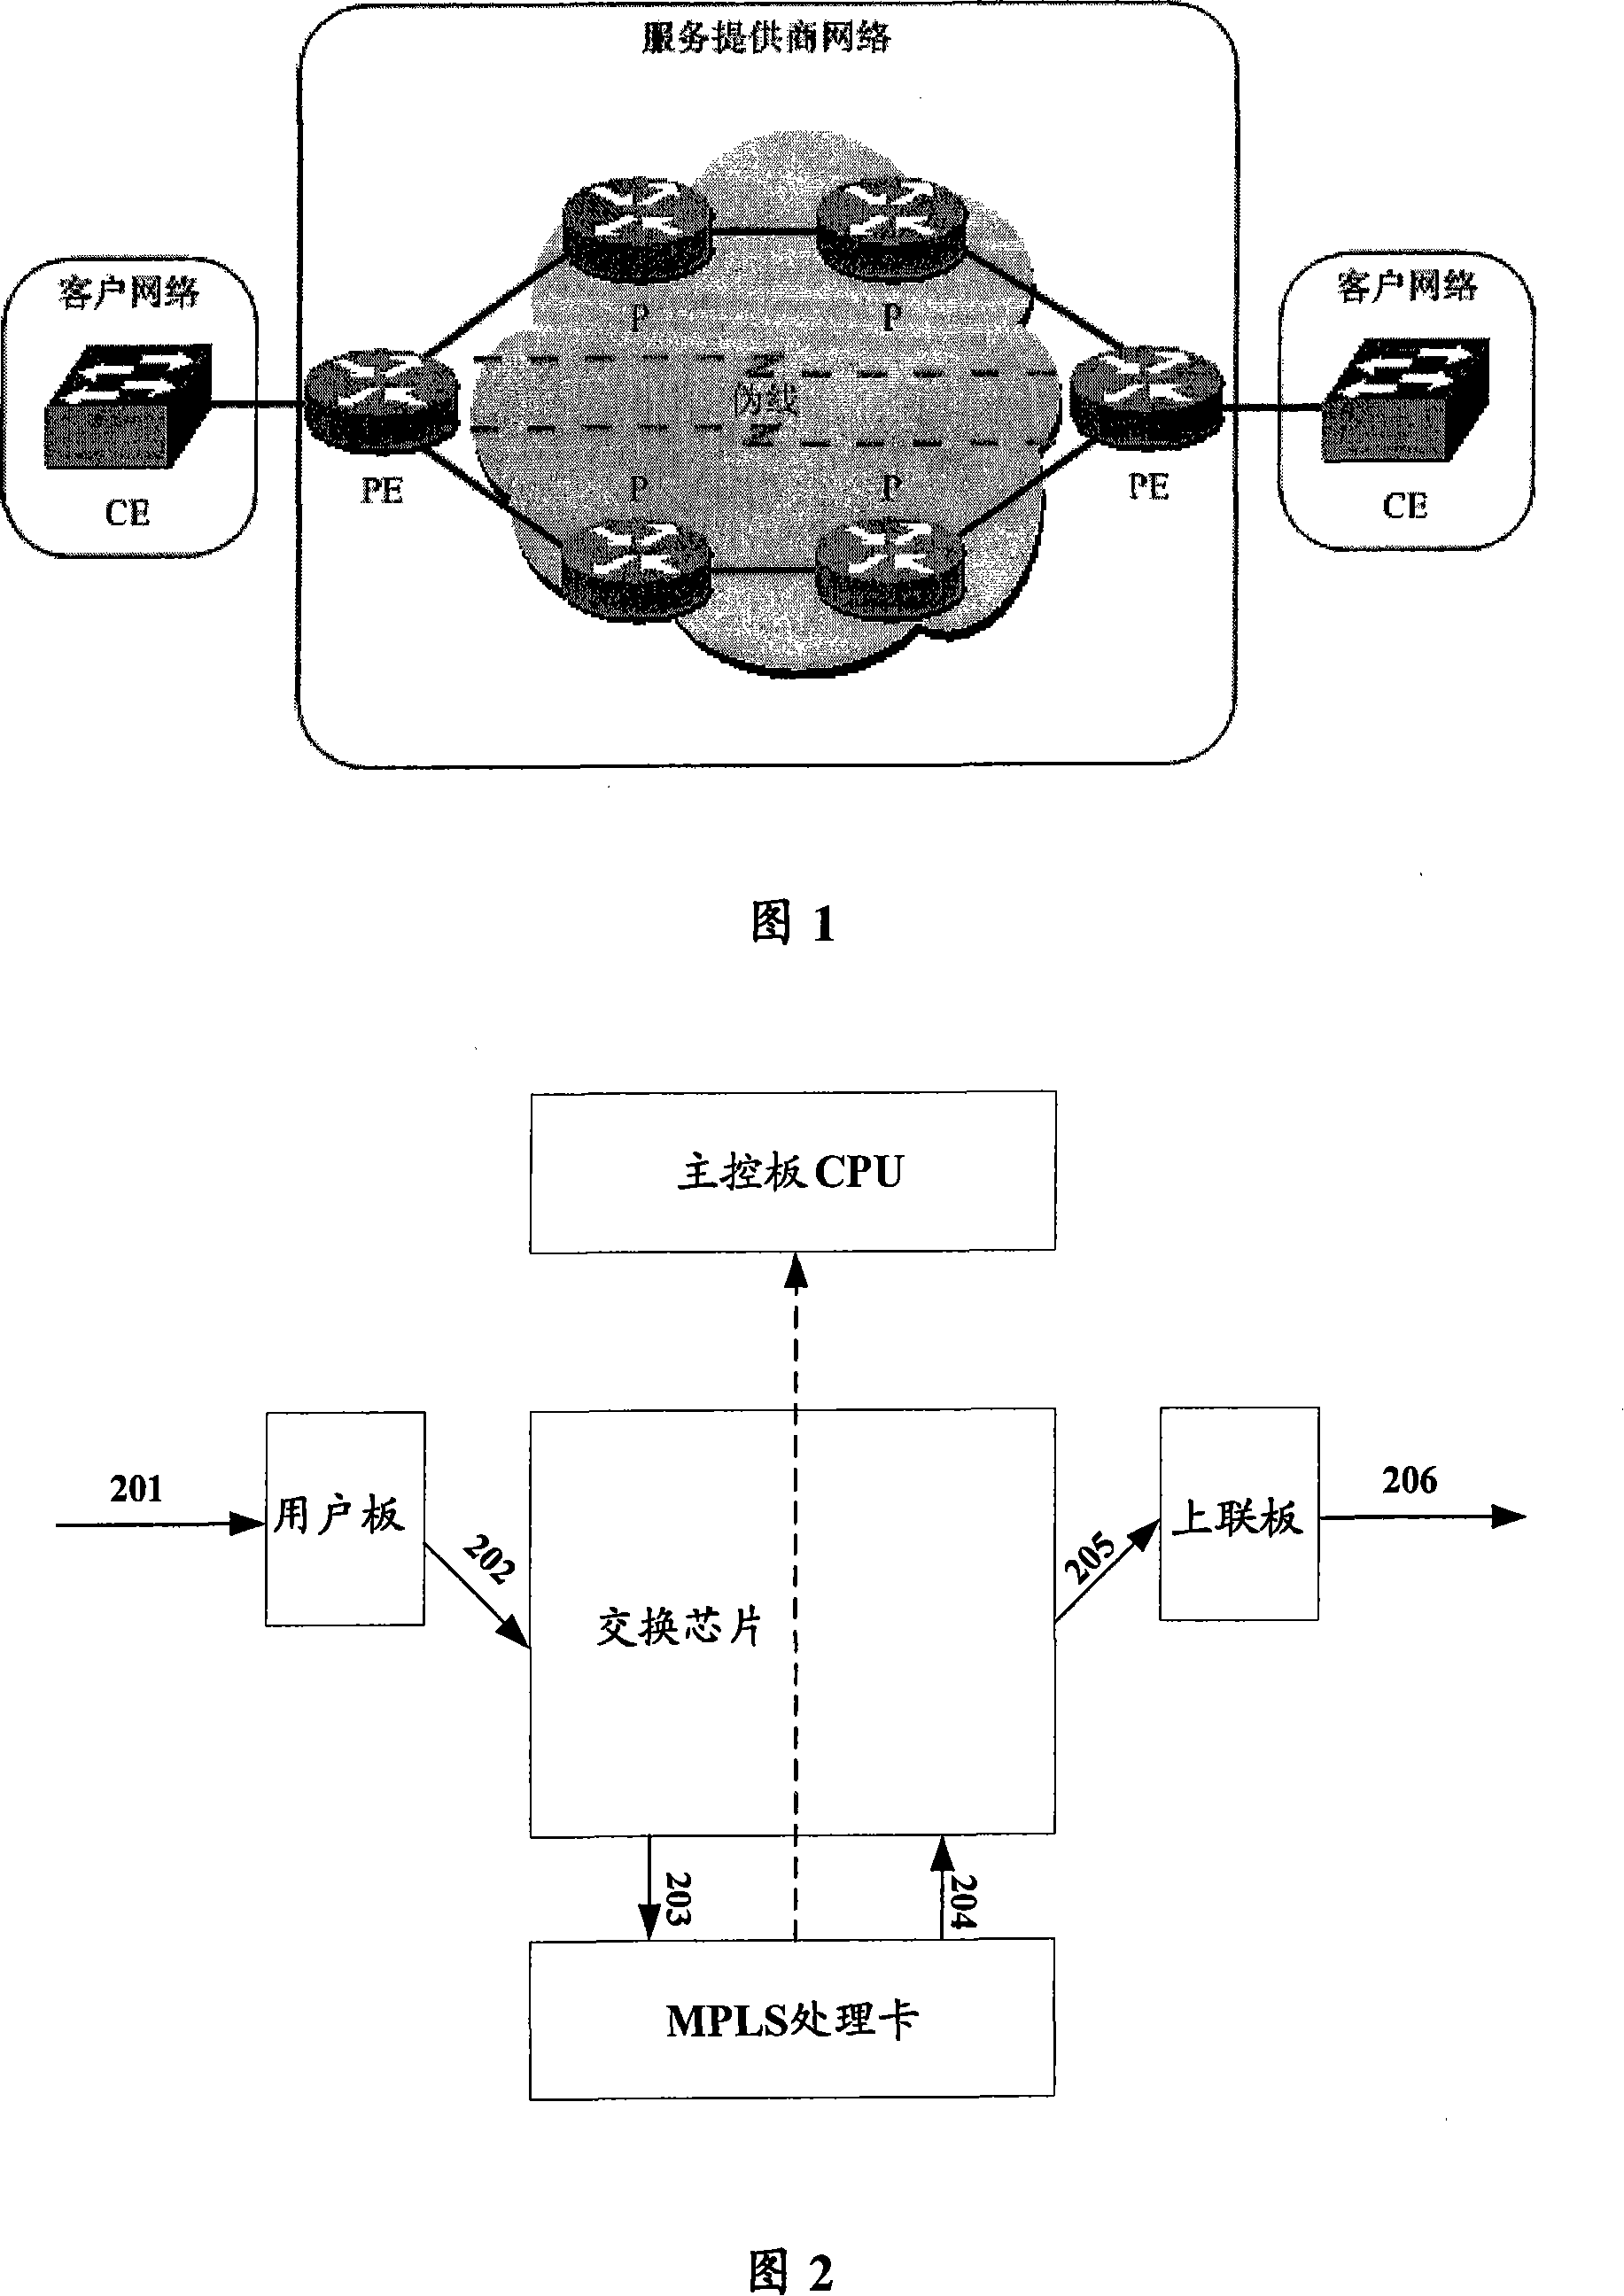 Method and apparatus for implementing edge-to-edge pseudo-line simulation